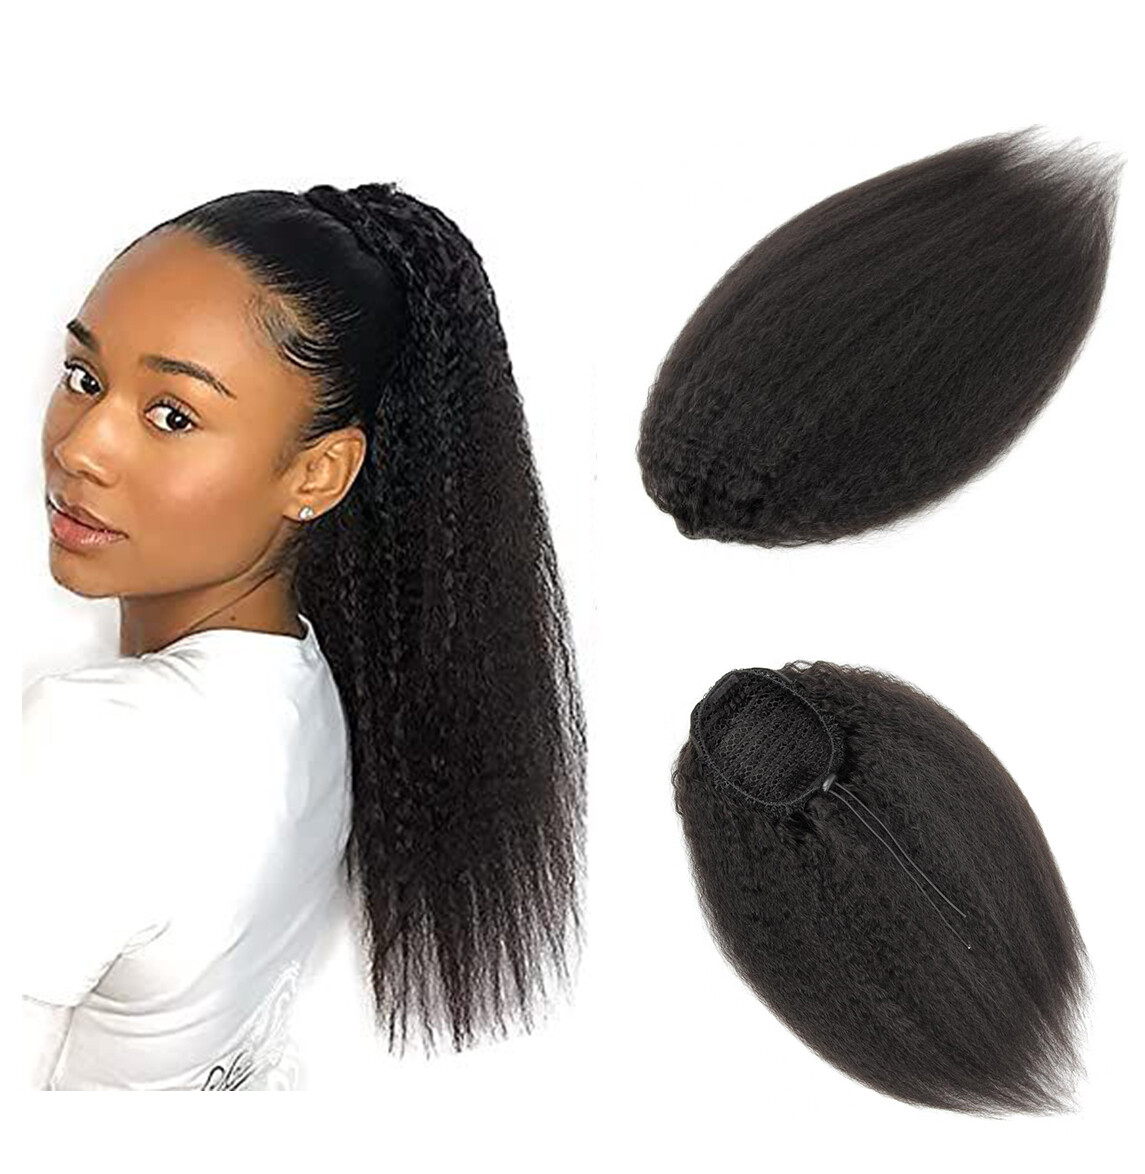 Human hair extensions Yvonne kinky straight ponytail